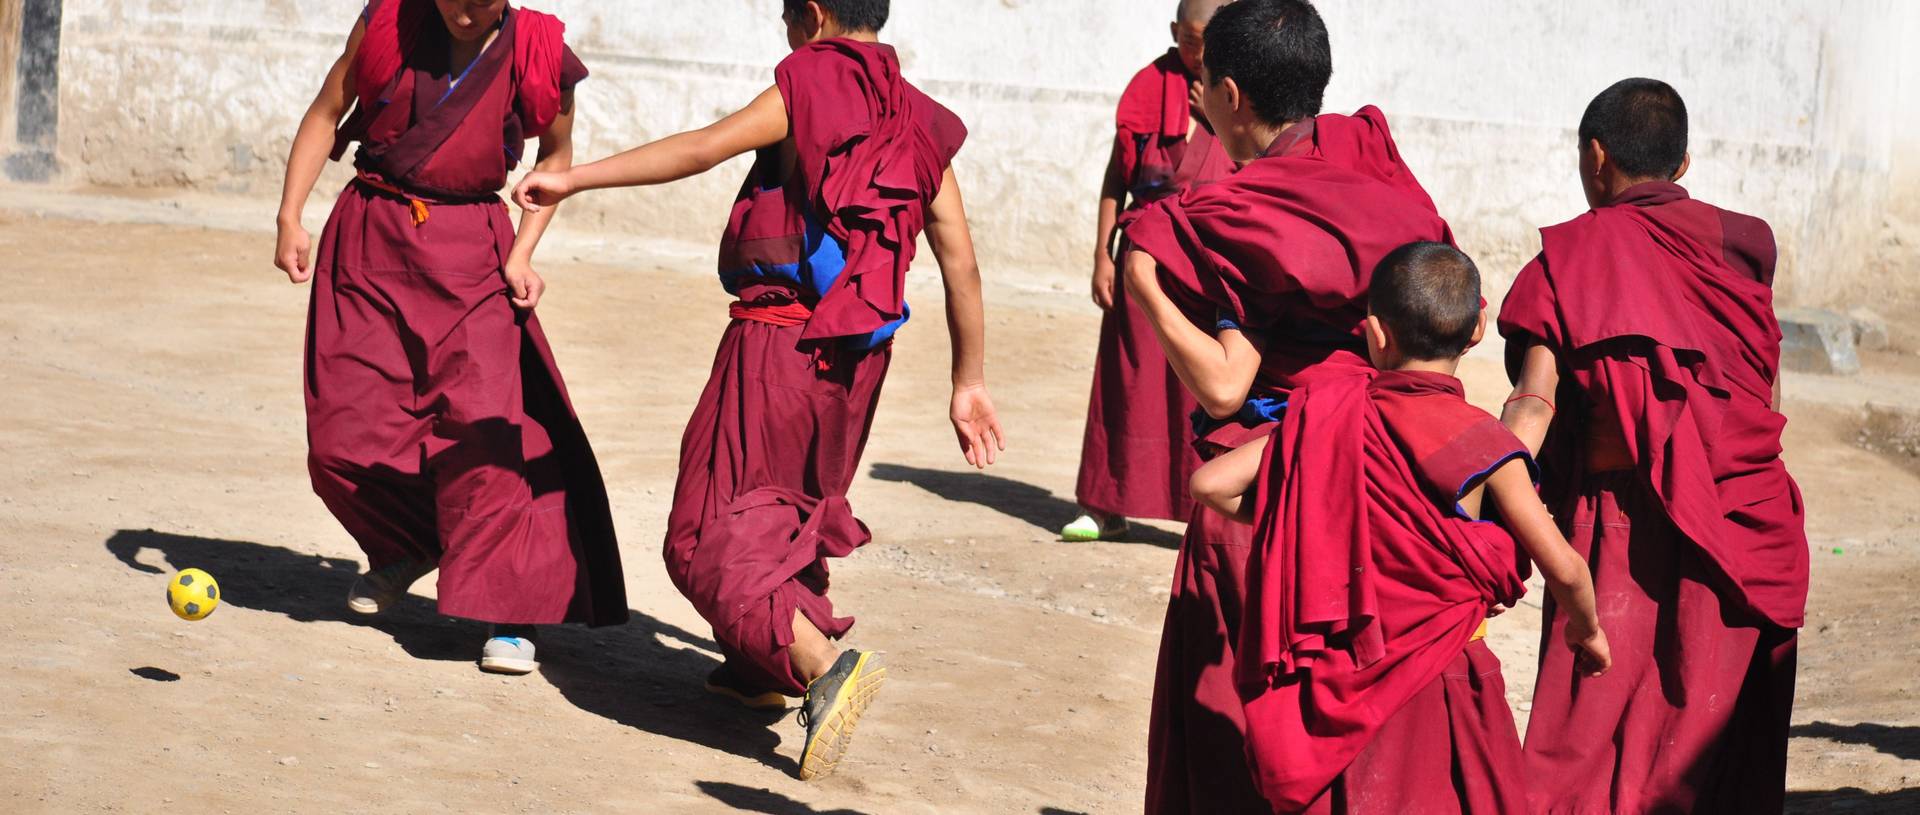 Monks Practicing Their Football Skills